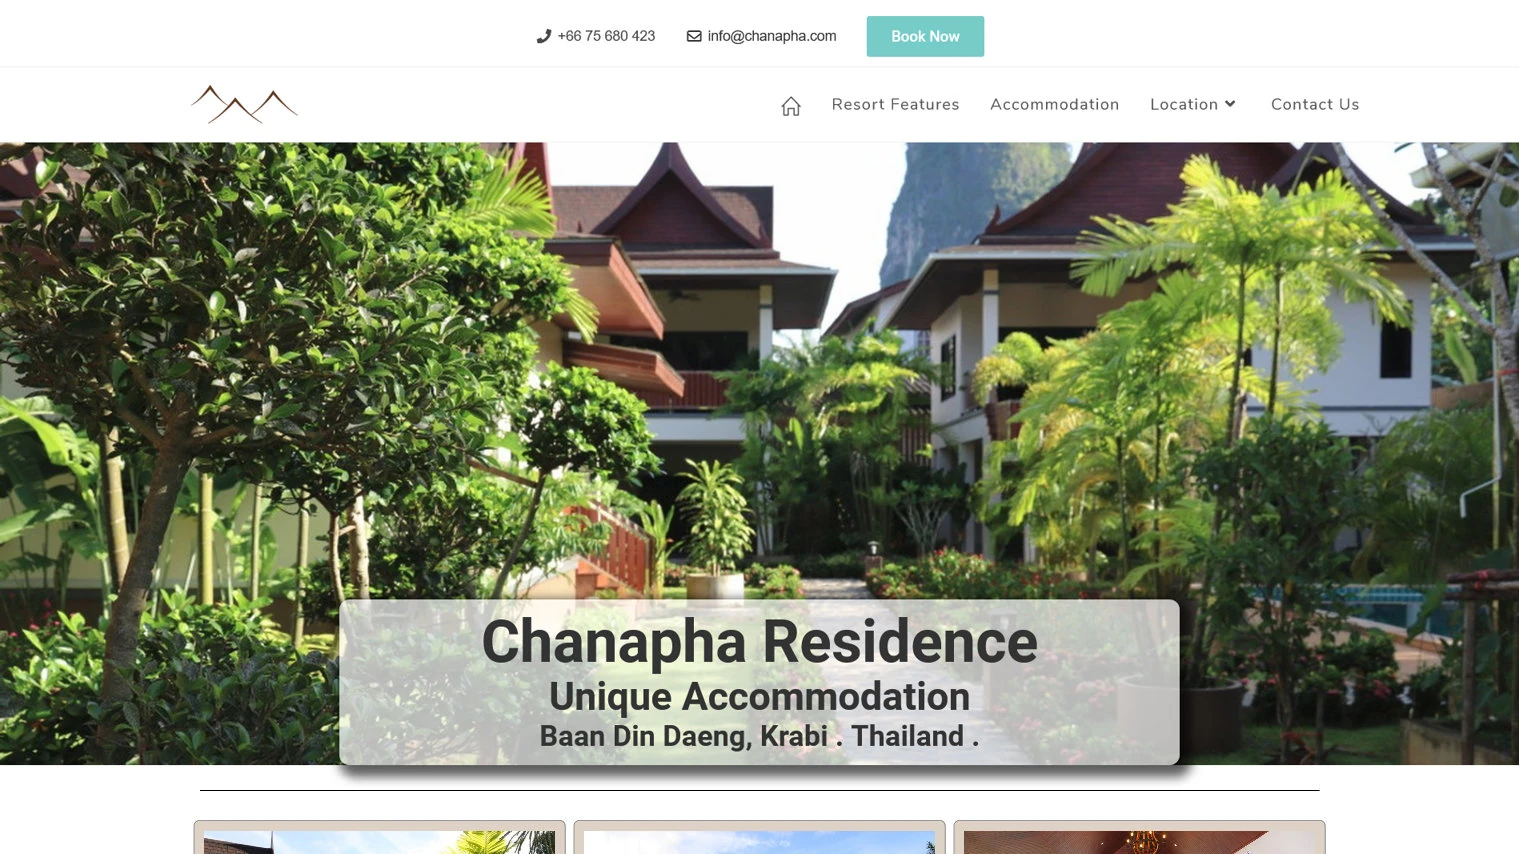 website design for a boutique hotel in Thailand